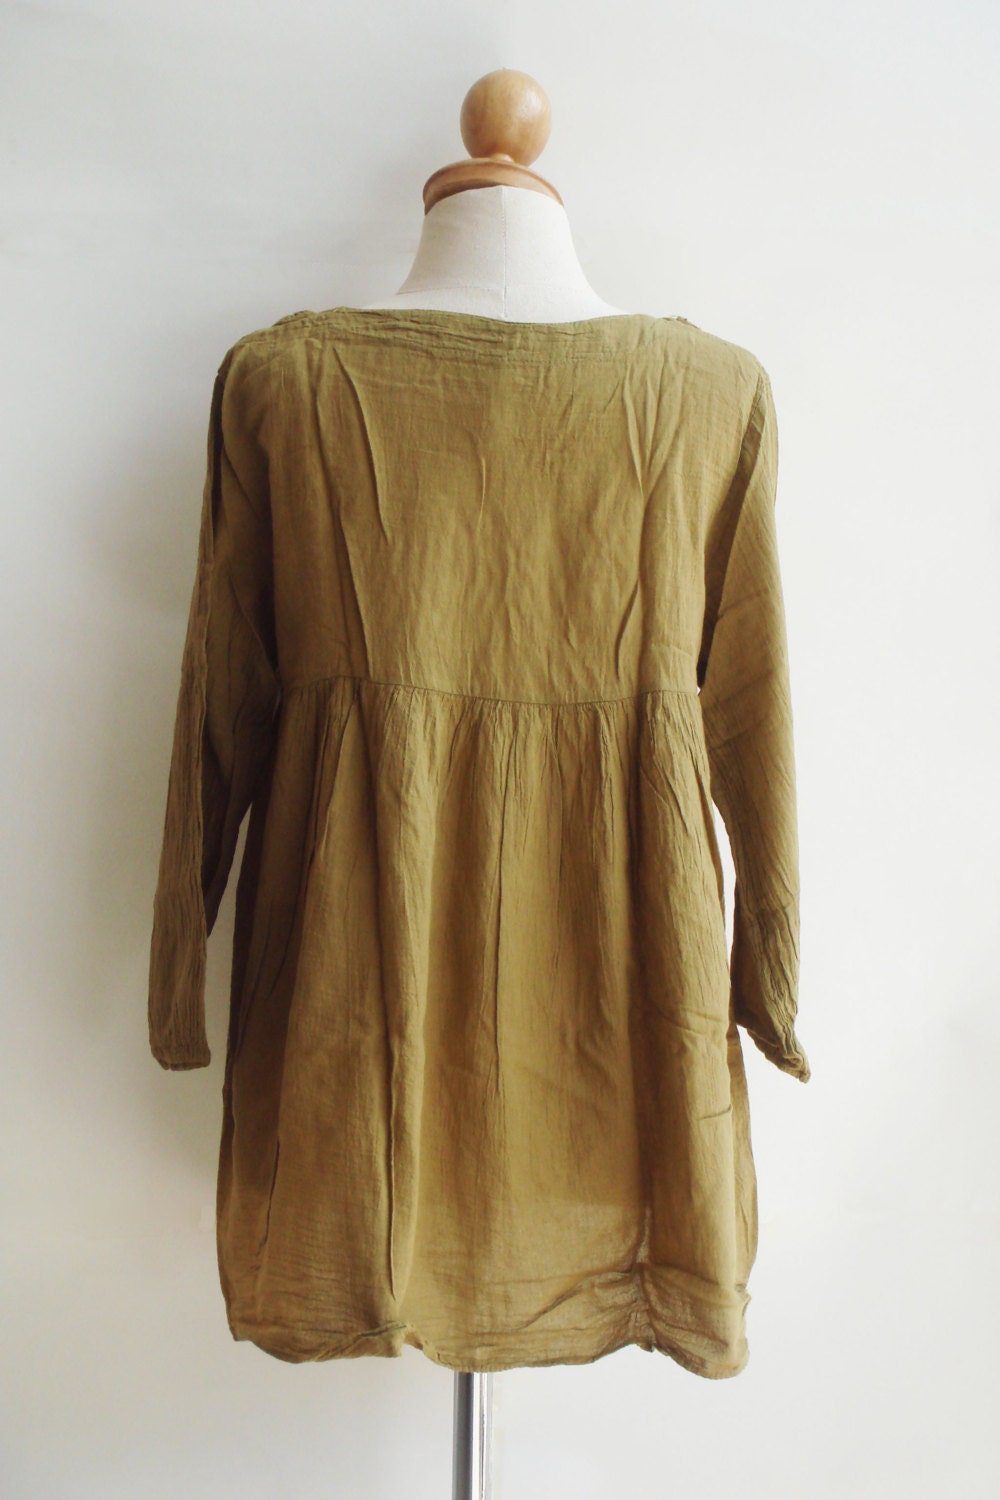 B10 Simply Classic Yellow Brown Cotton Blouse - Etsy